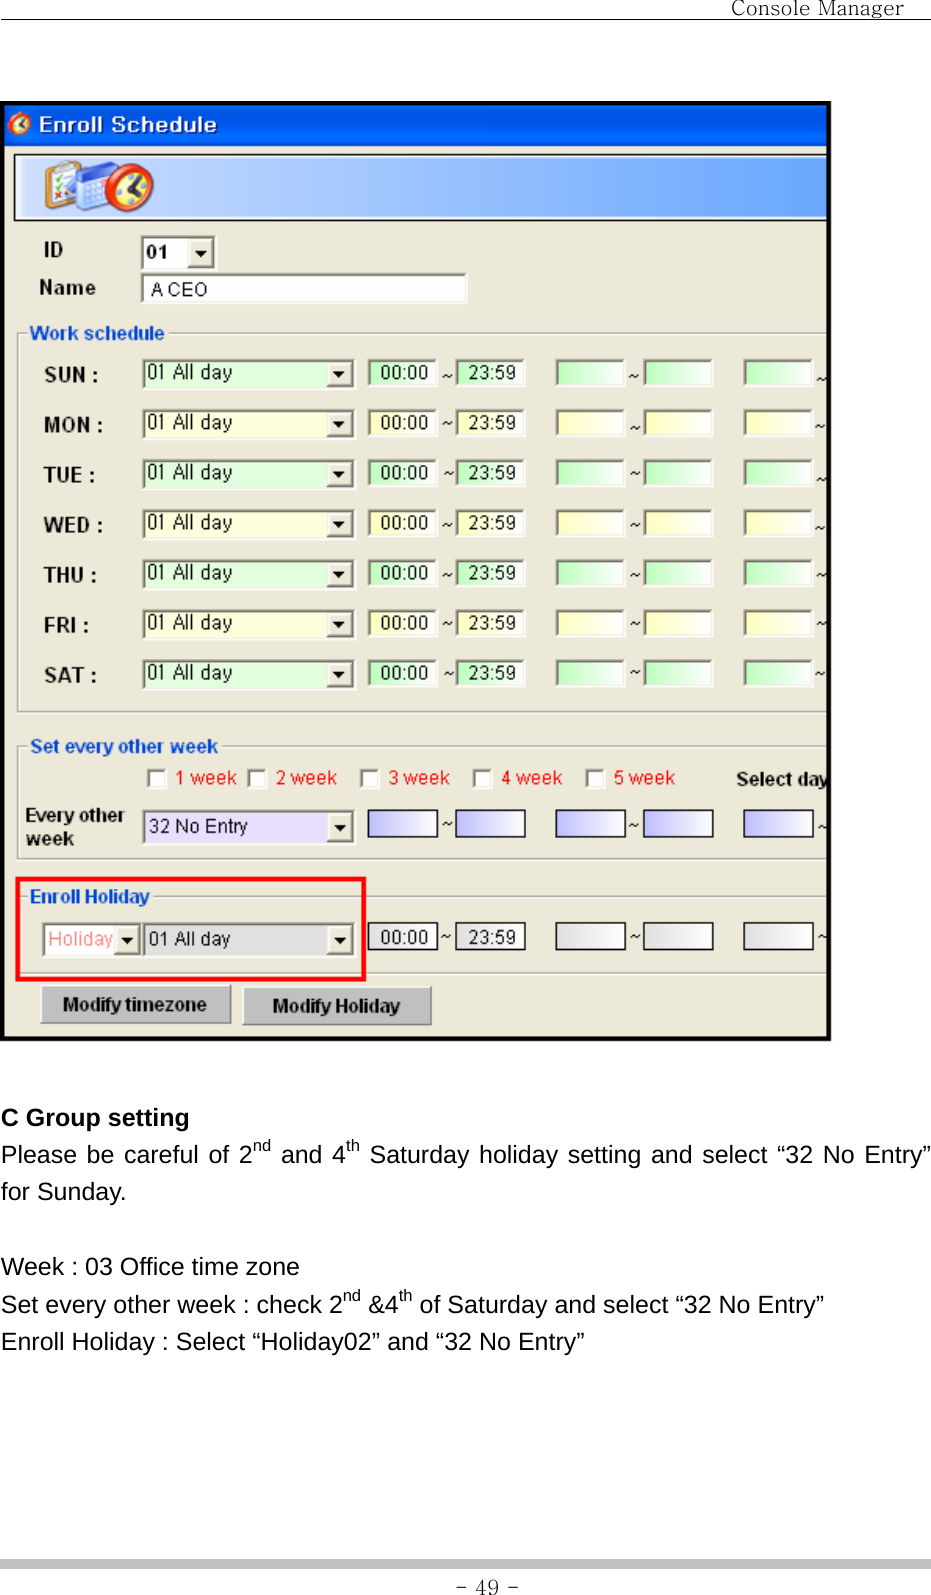                                Console Manager               - 49 -  C Group setting Please be careful of 2nd and 4th Saturday holiday setting and select “32 No Entry” for Sunday.  Week : 03 Office time zone Set every other week : check 2nd &amp;4th of Saturday and select “32 No Entry” Enroll Holiday : Select “Holiday02” and “32 No Entry”  